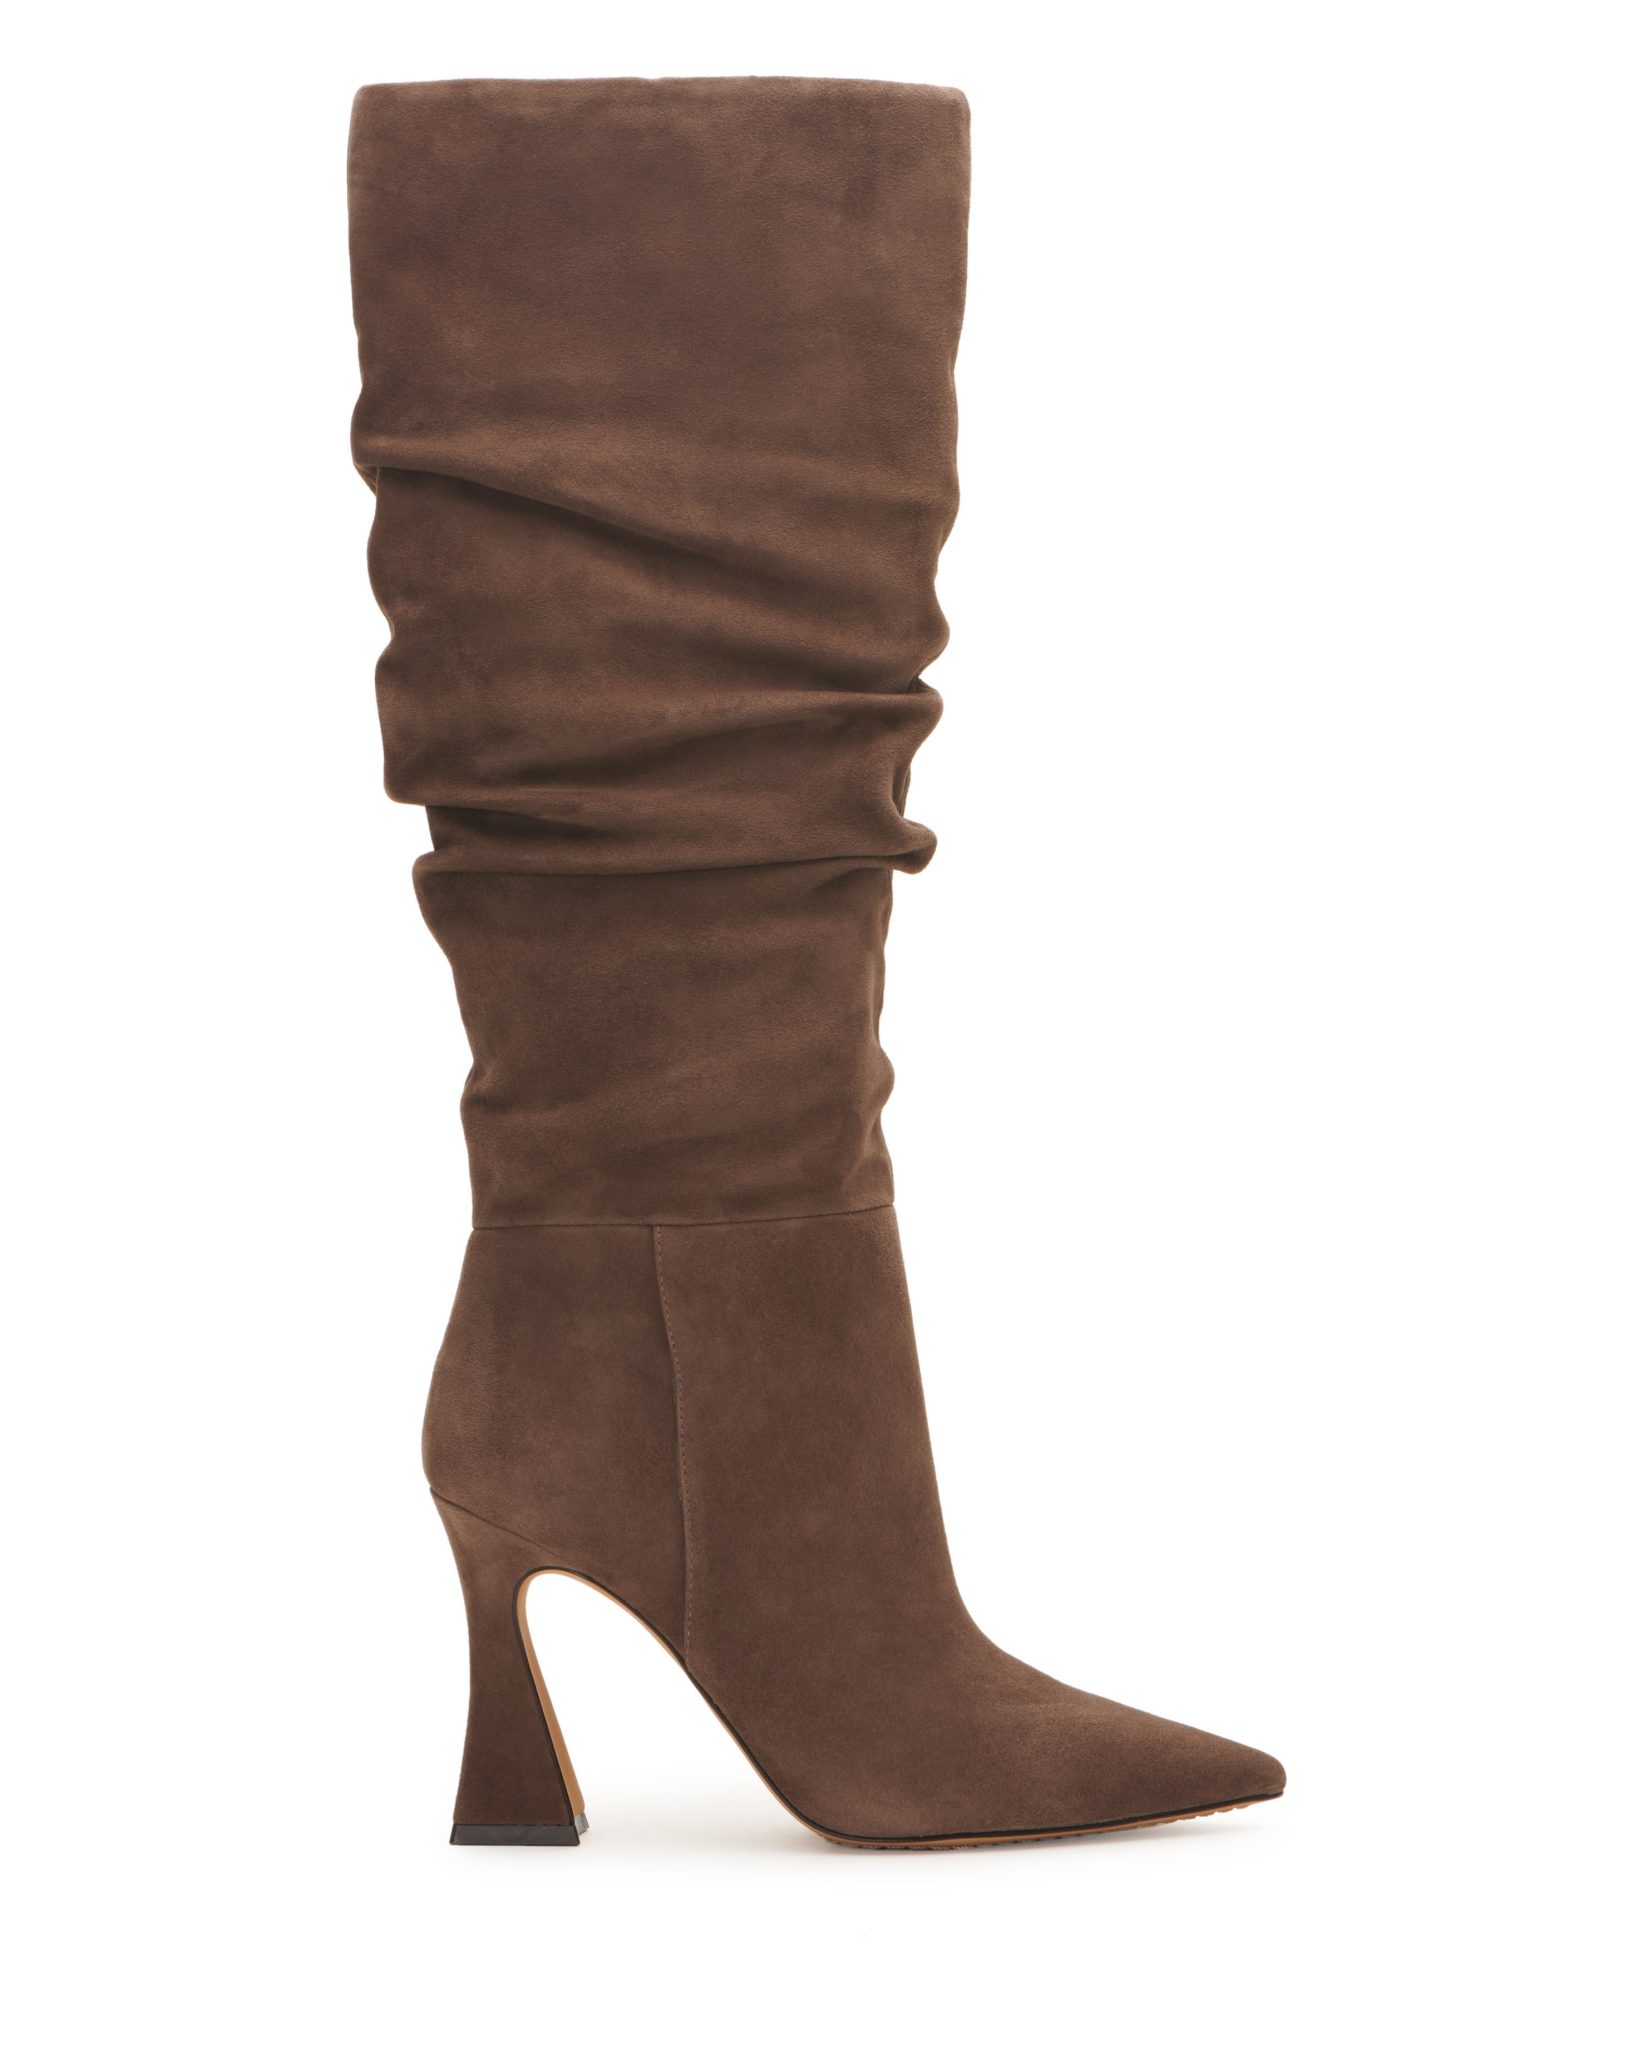 2. Vince Camuto Alinkay Boot